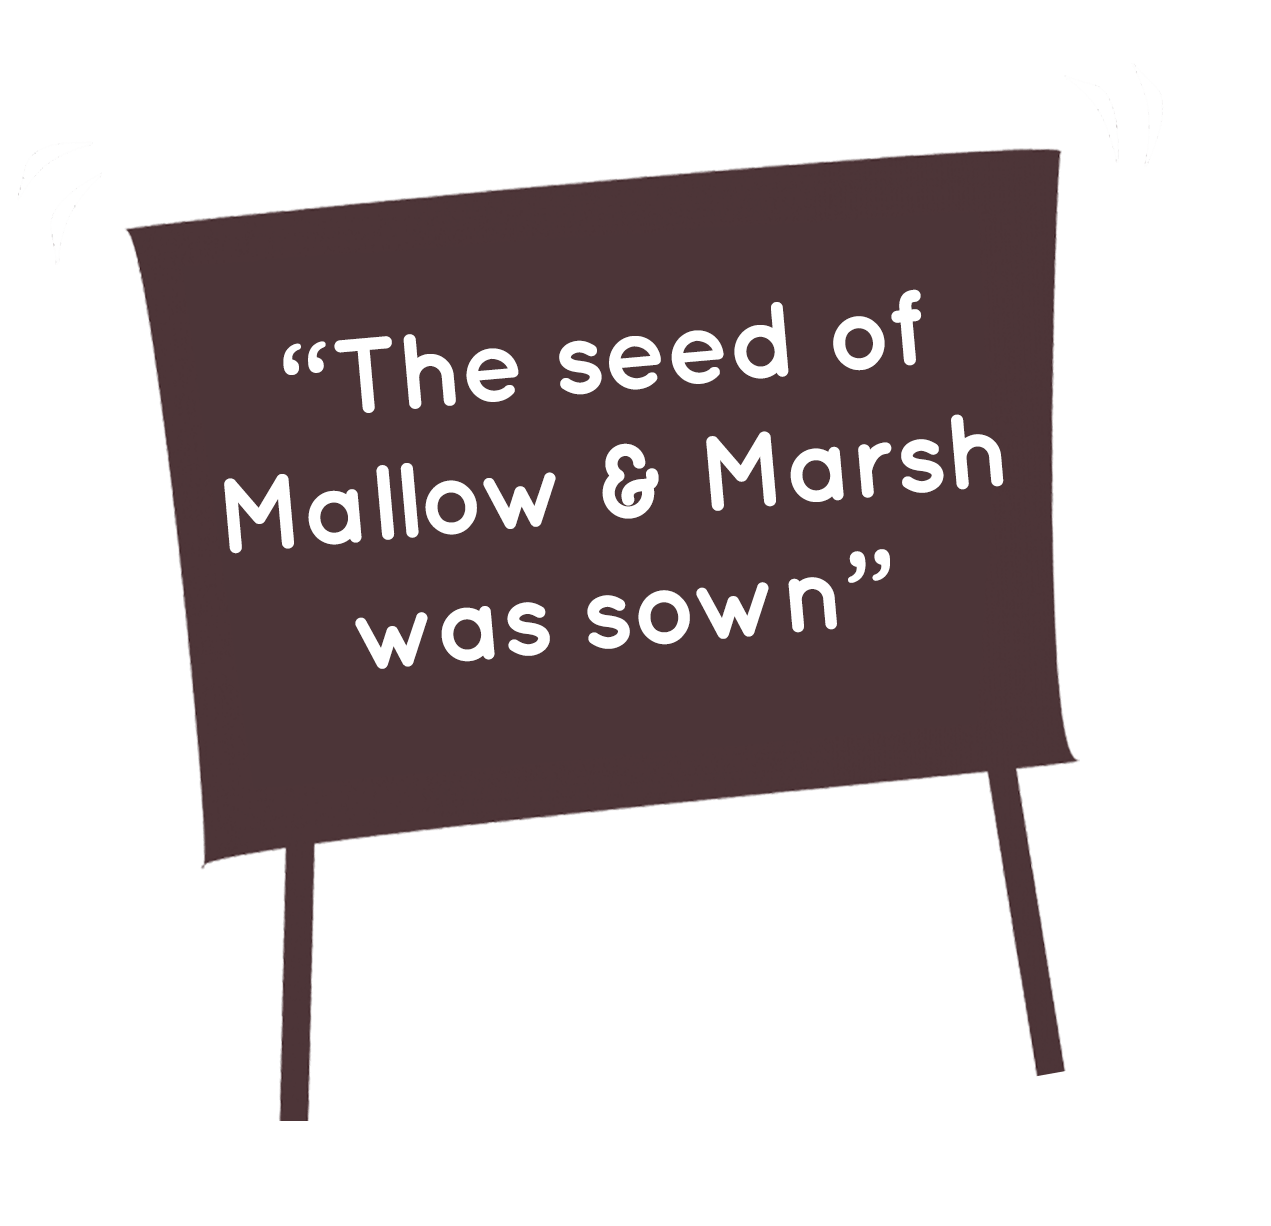 The seed of mallow and marsh was sown